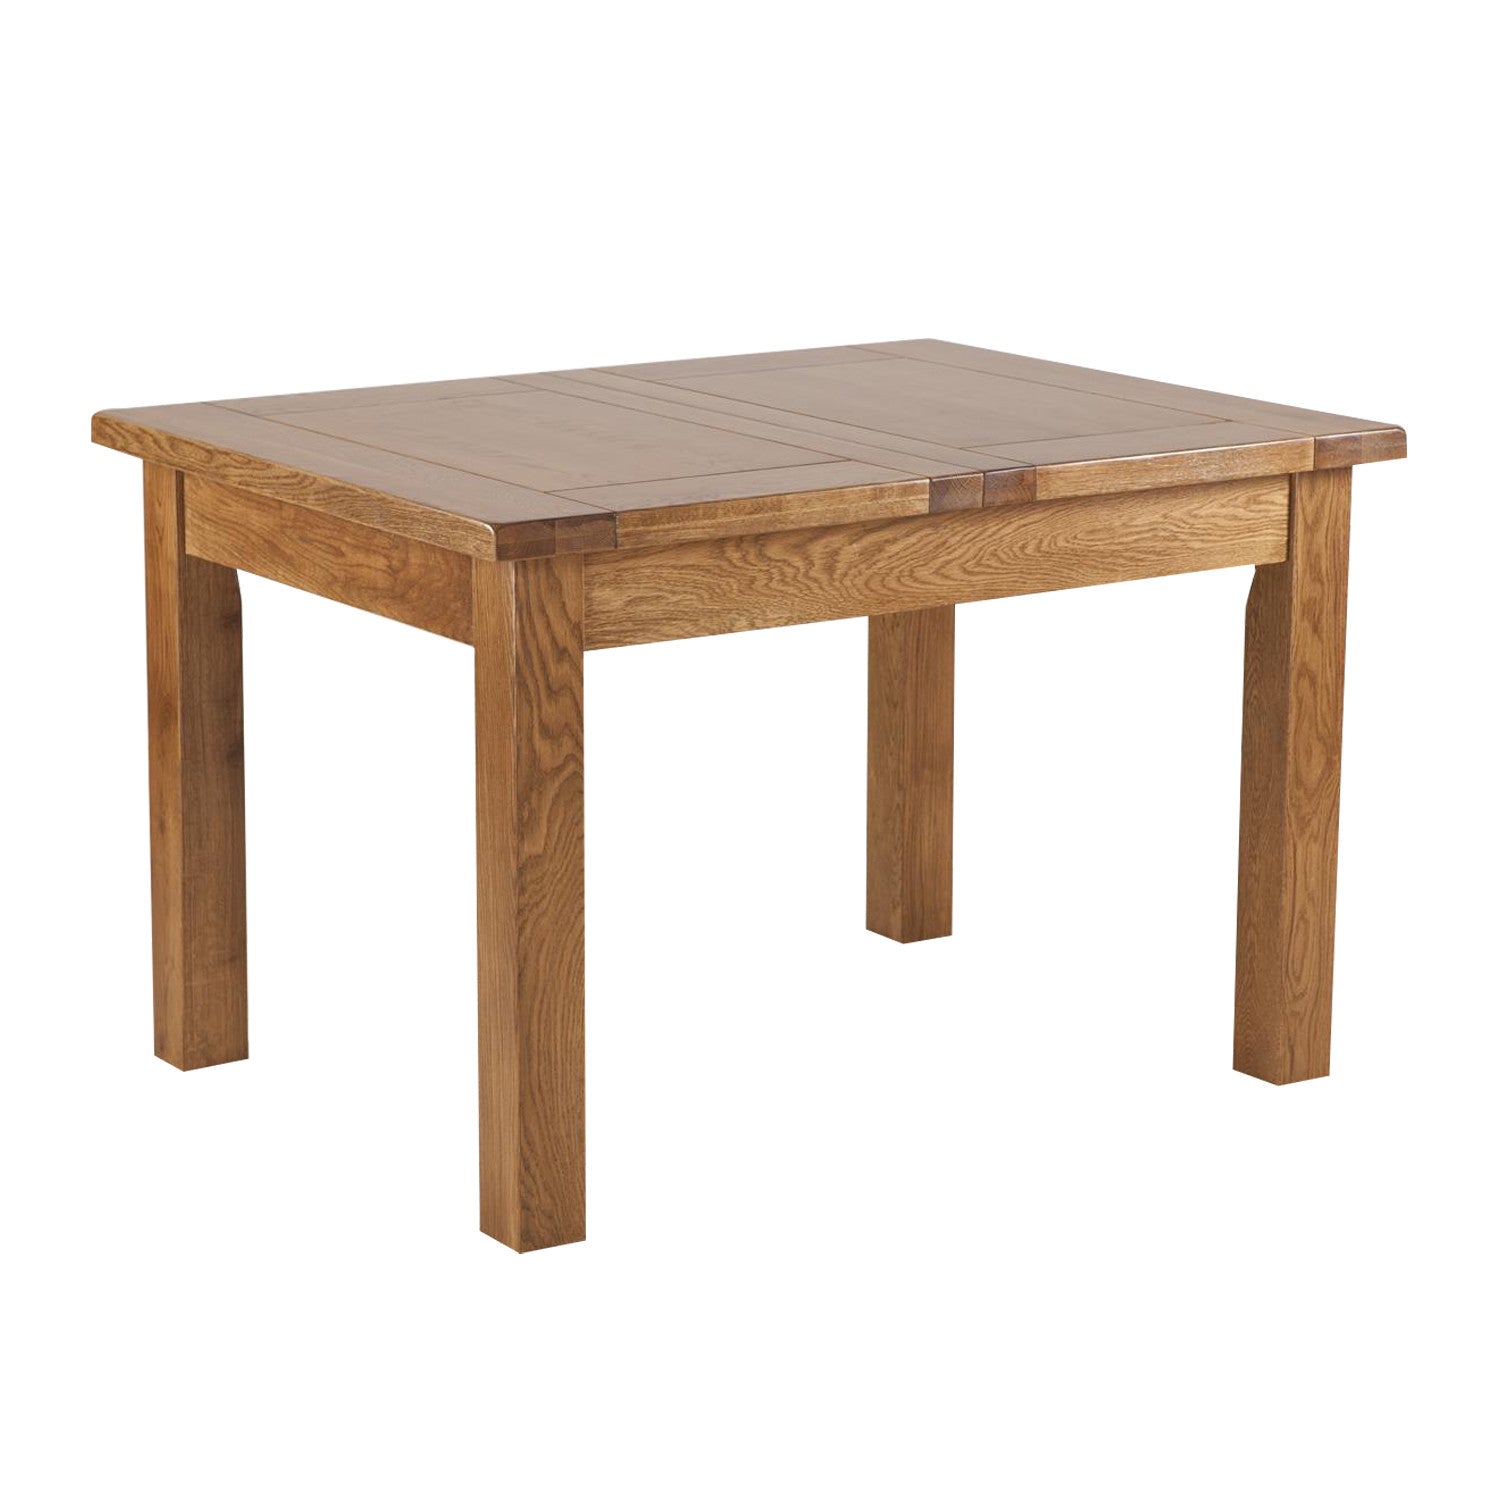 Auvergne Solid Oak Dining Table - 4ft6 Extending (2 Leaf) - Better Furniture Norwich & Great Yarmouth